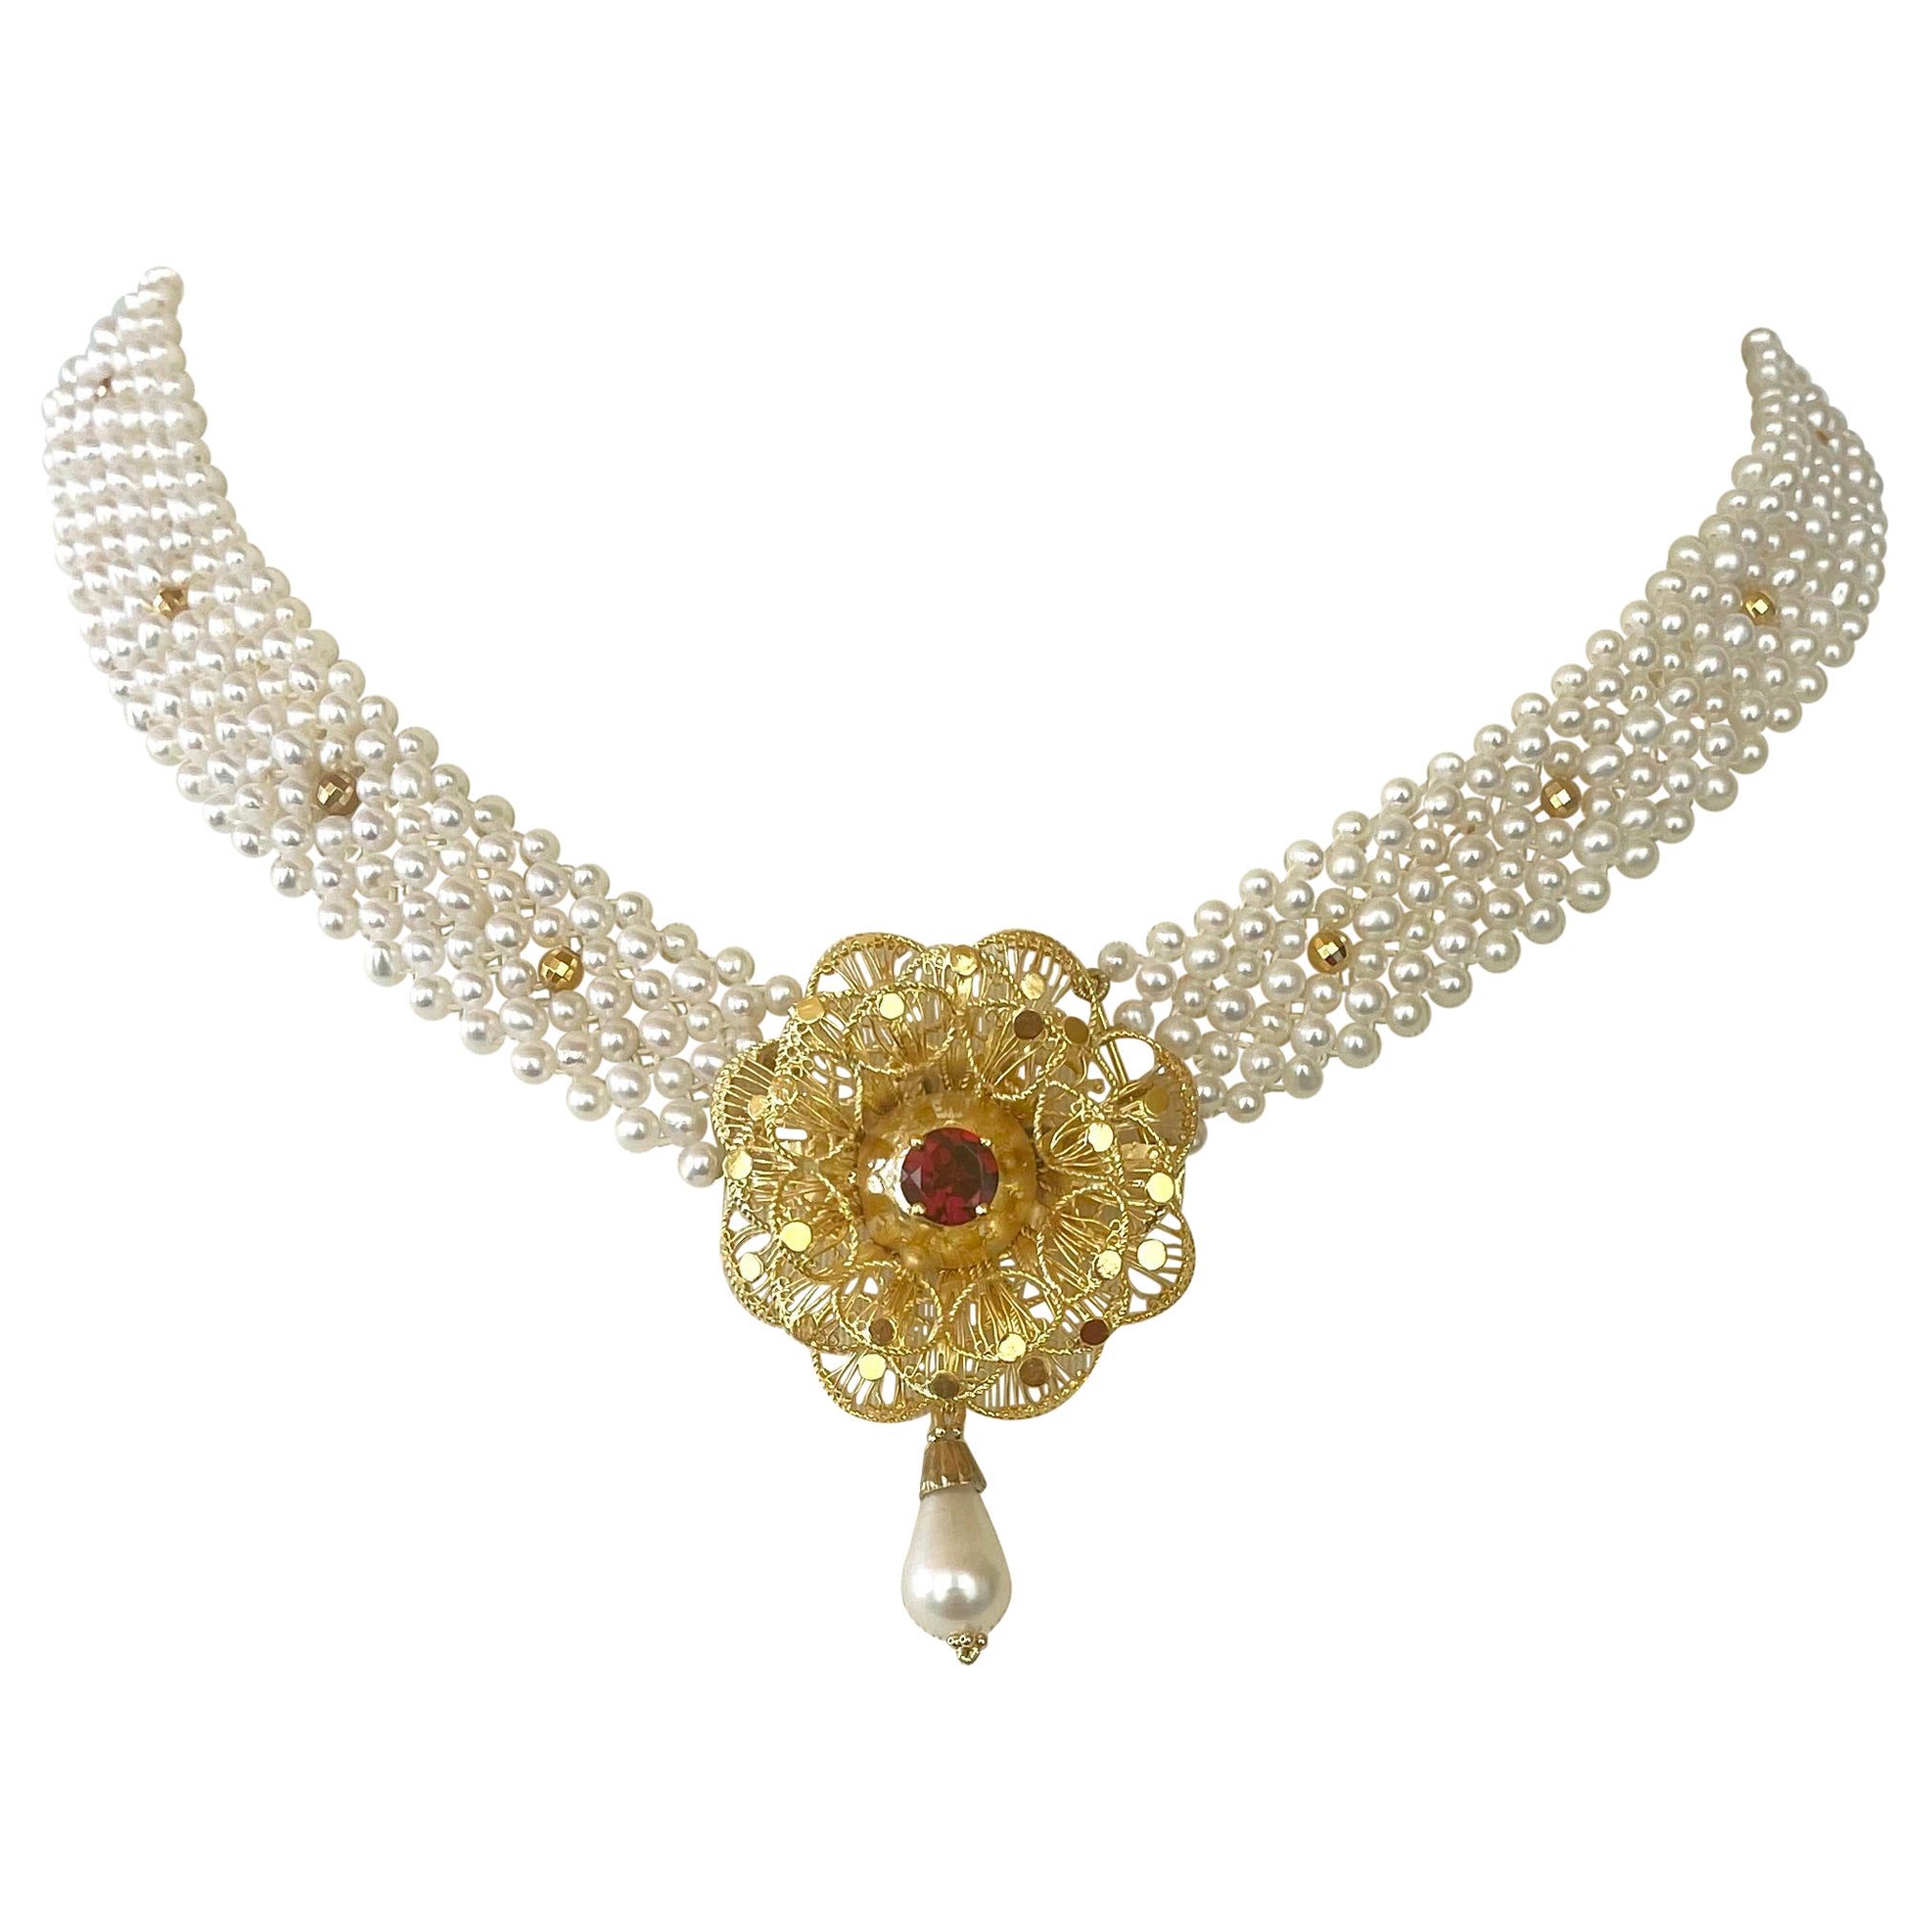 Marina J woven Pearl necklace with gold-plated Silver vintage brooch with Garnet For Sale